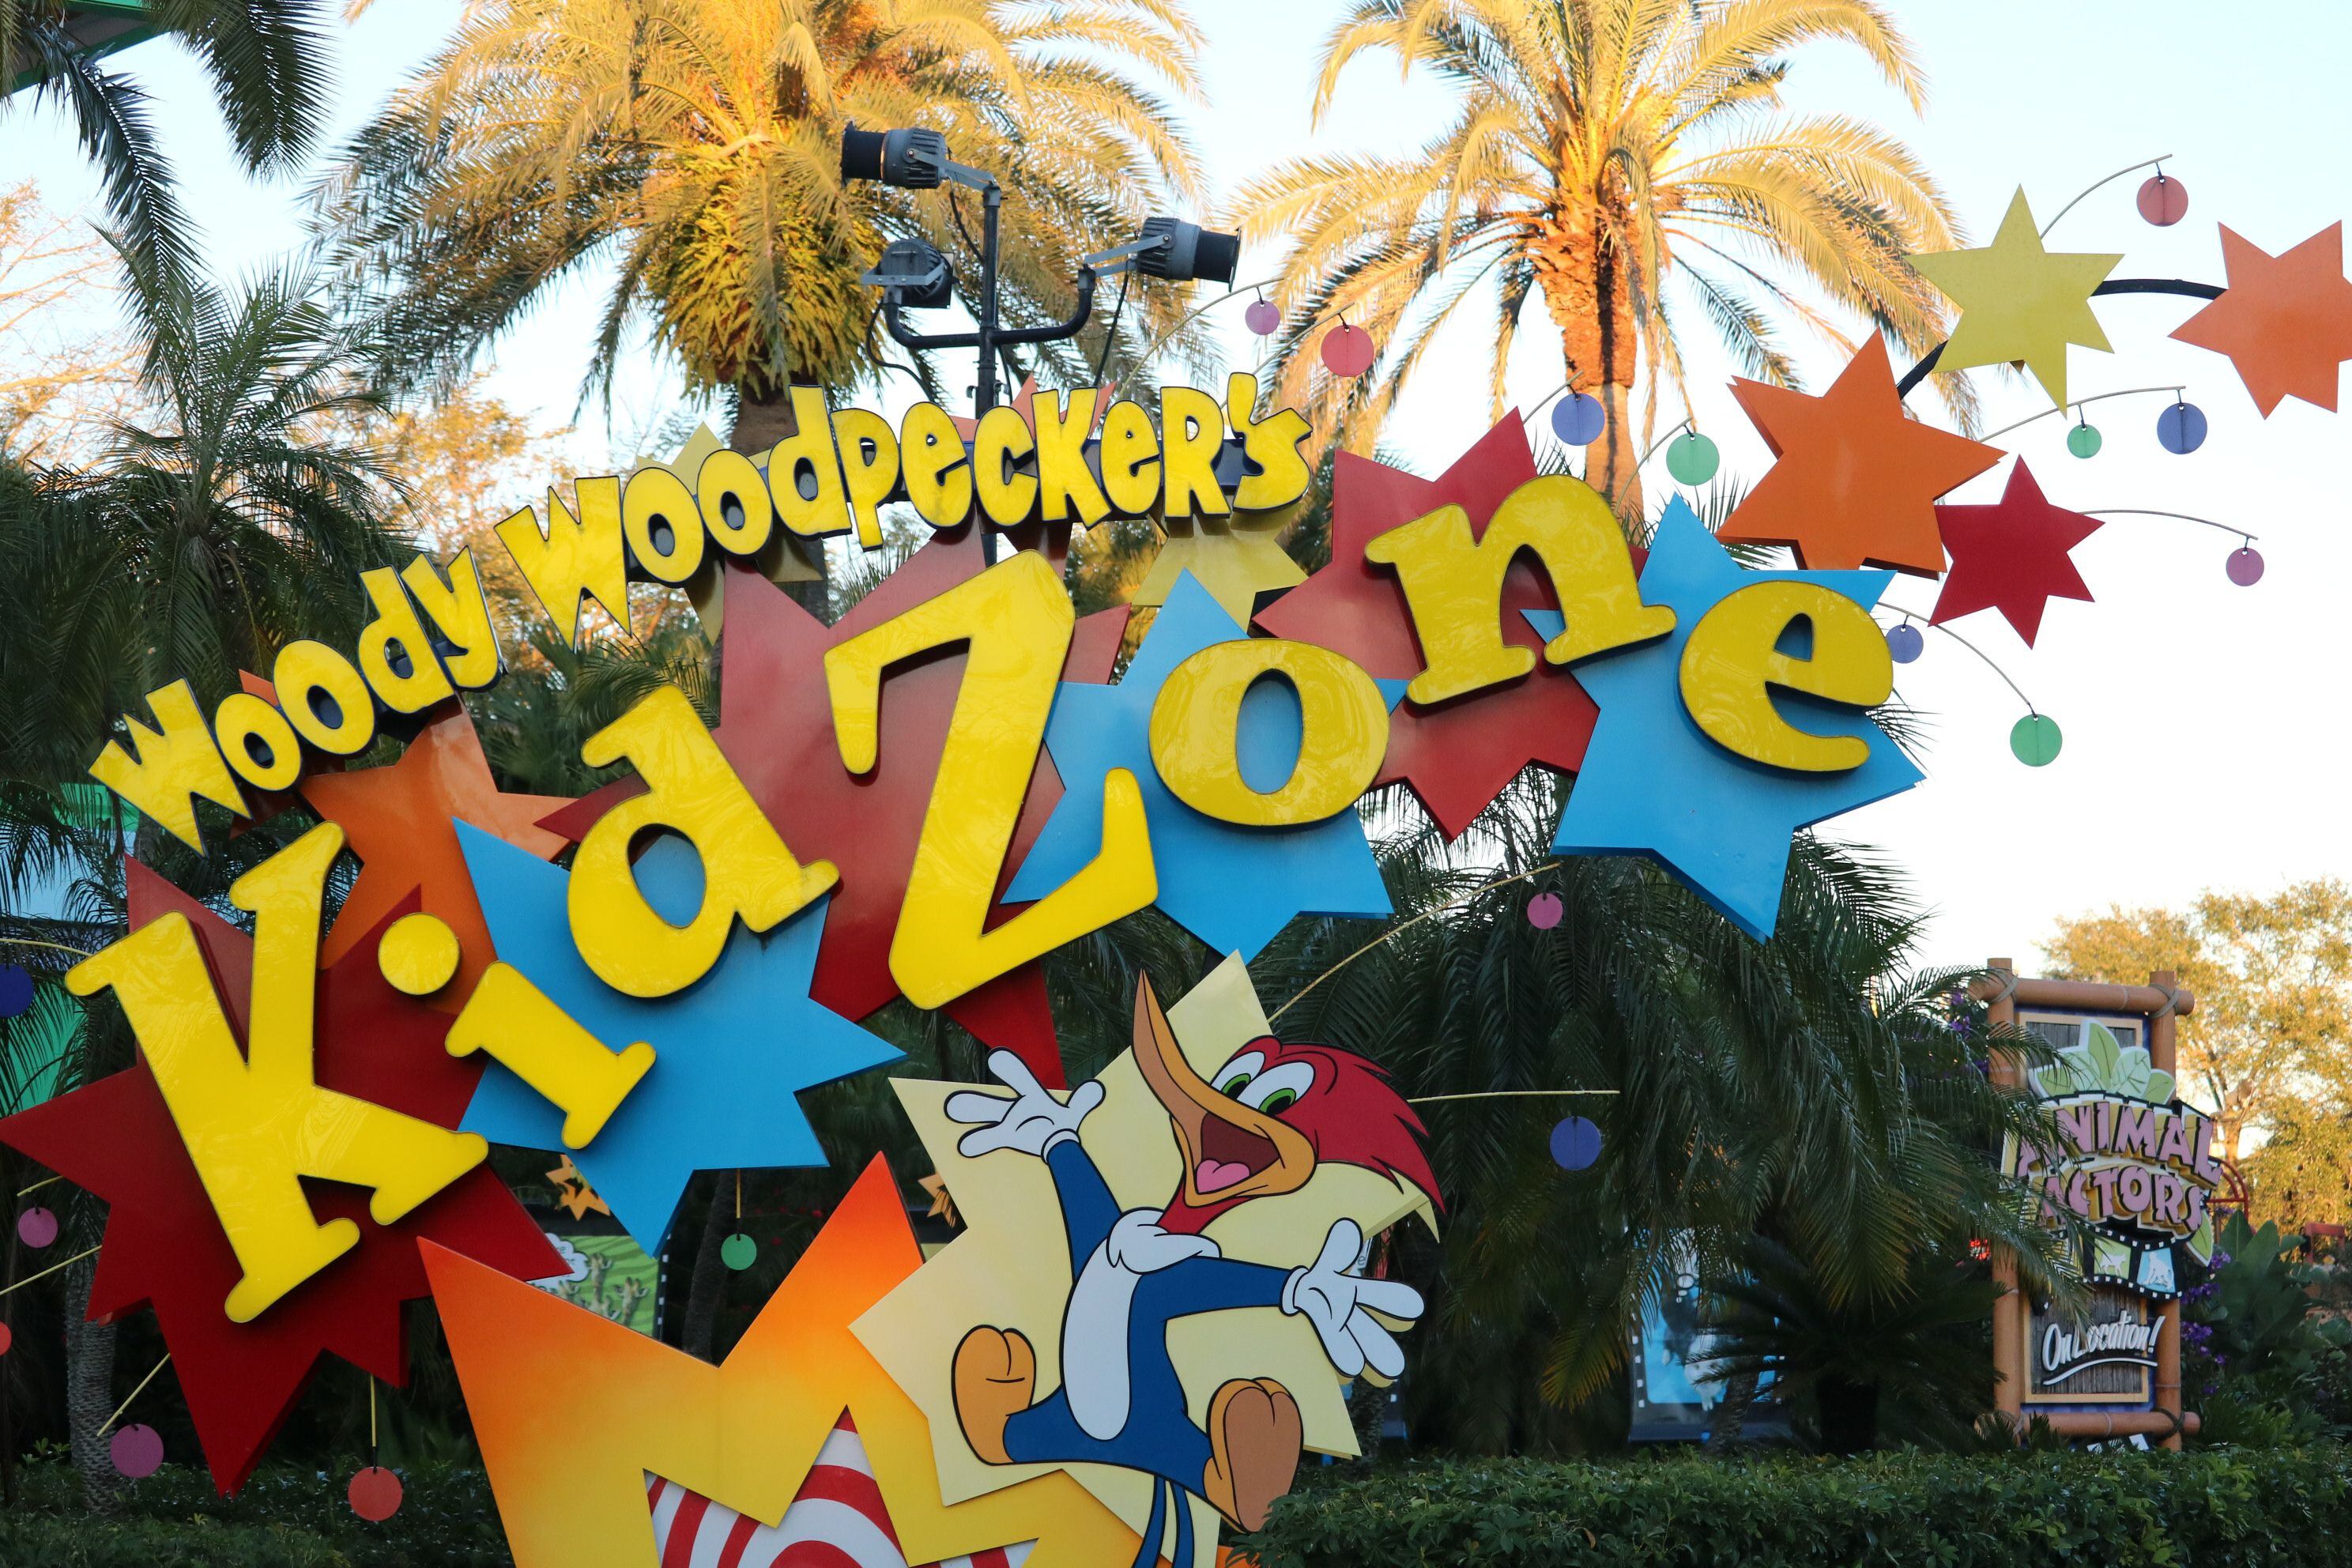 Universal’s KidZone attractions permanently close to make way for new experiences